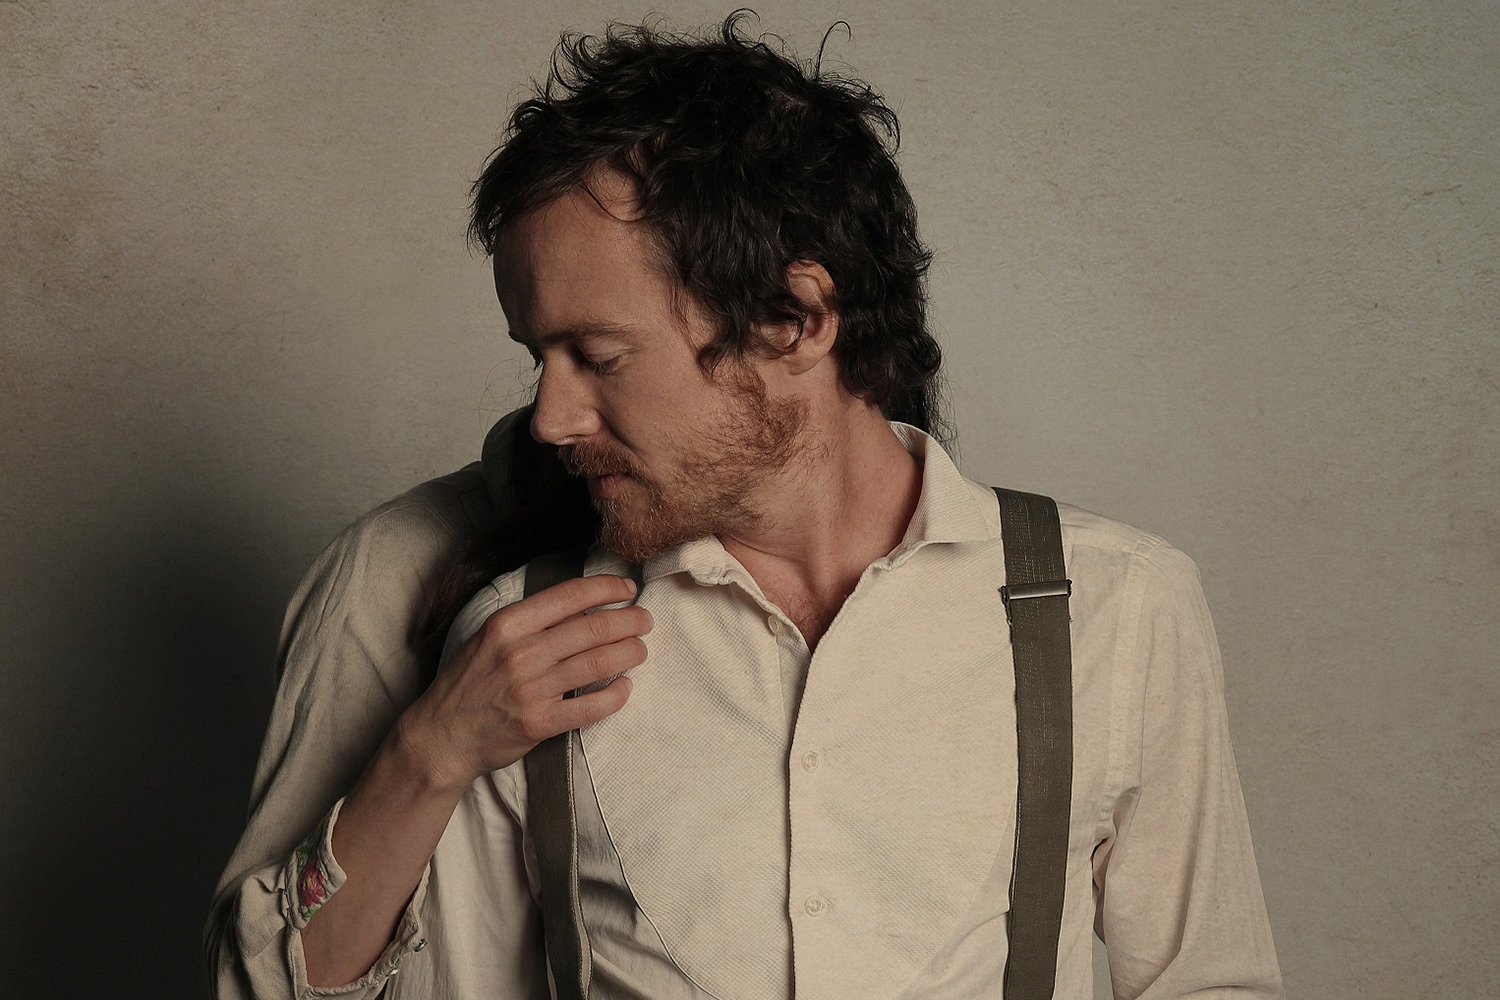 Damien Rice shares ‘I Don’t Want To Change You’ single